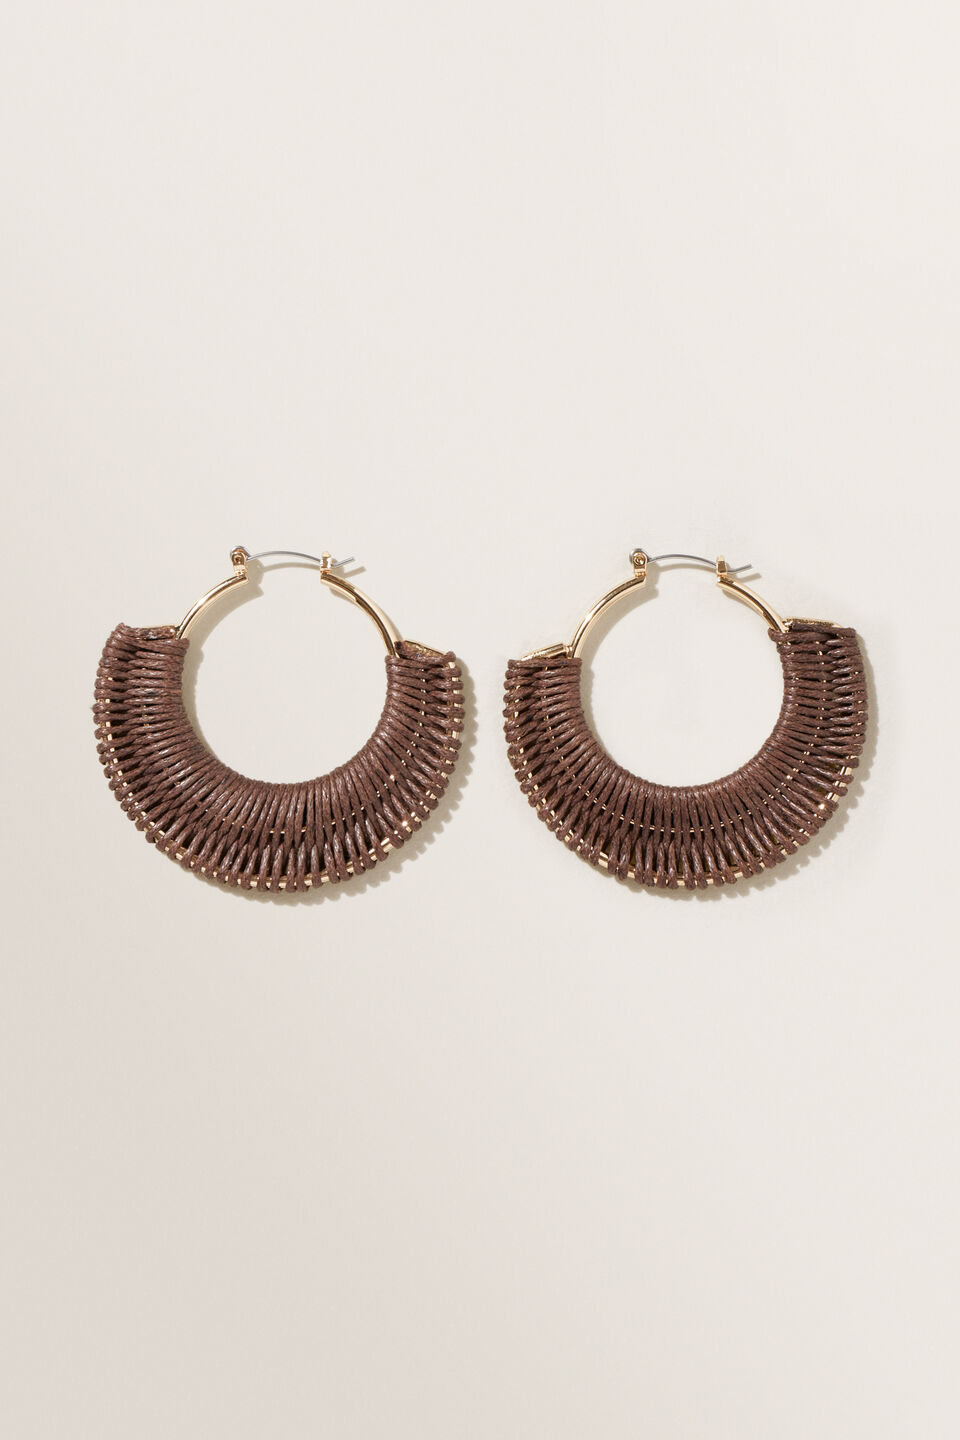 Woven Cord Hoops  Russet Brown